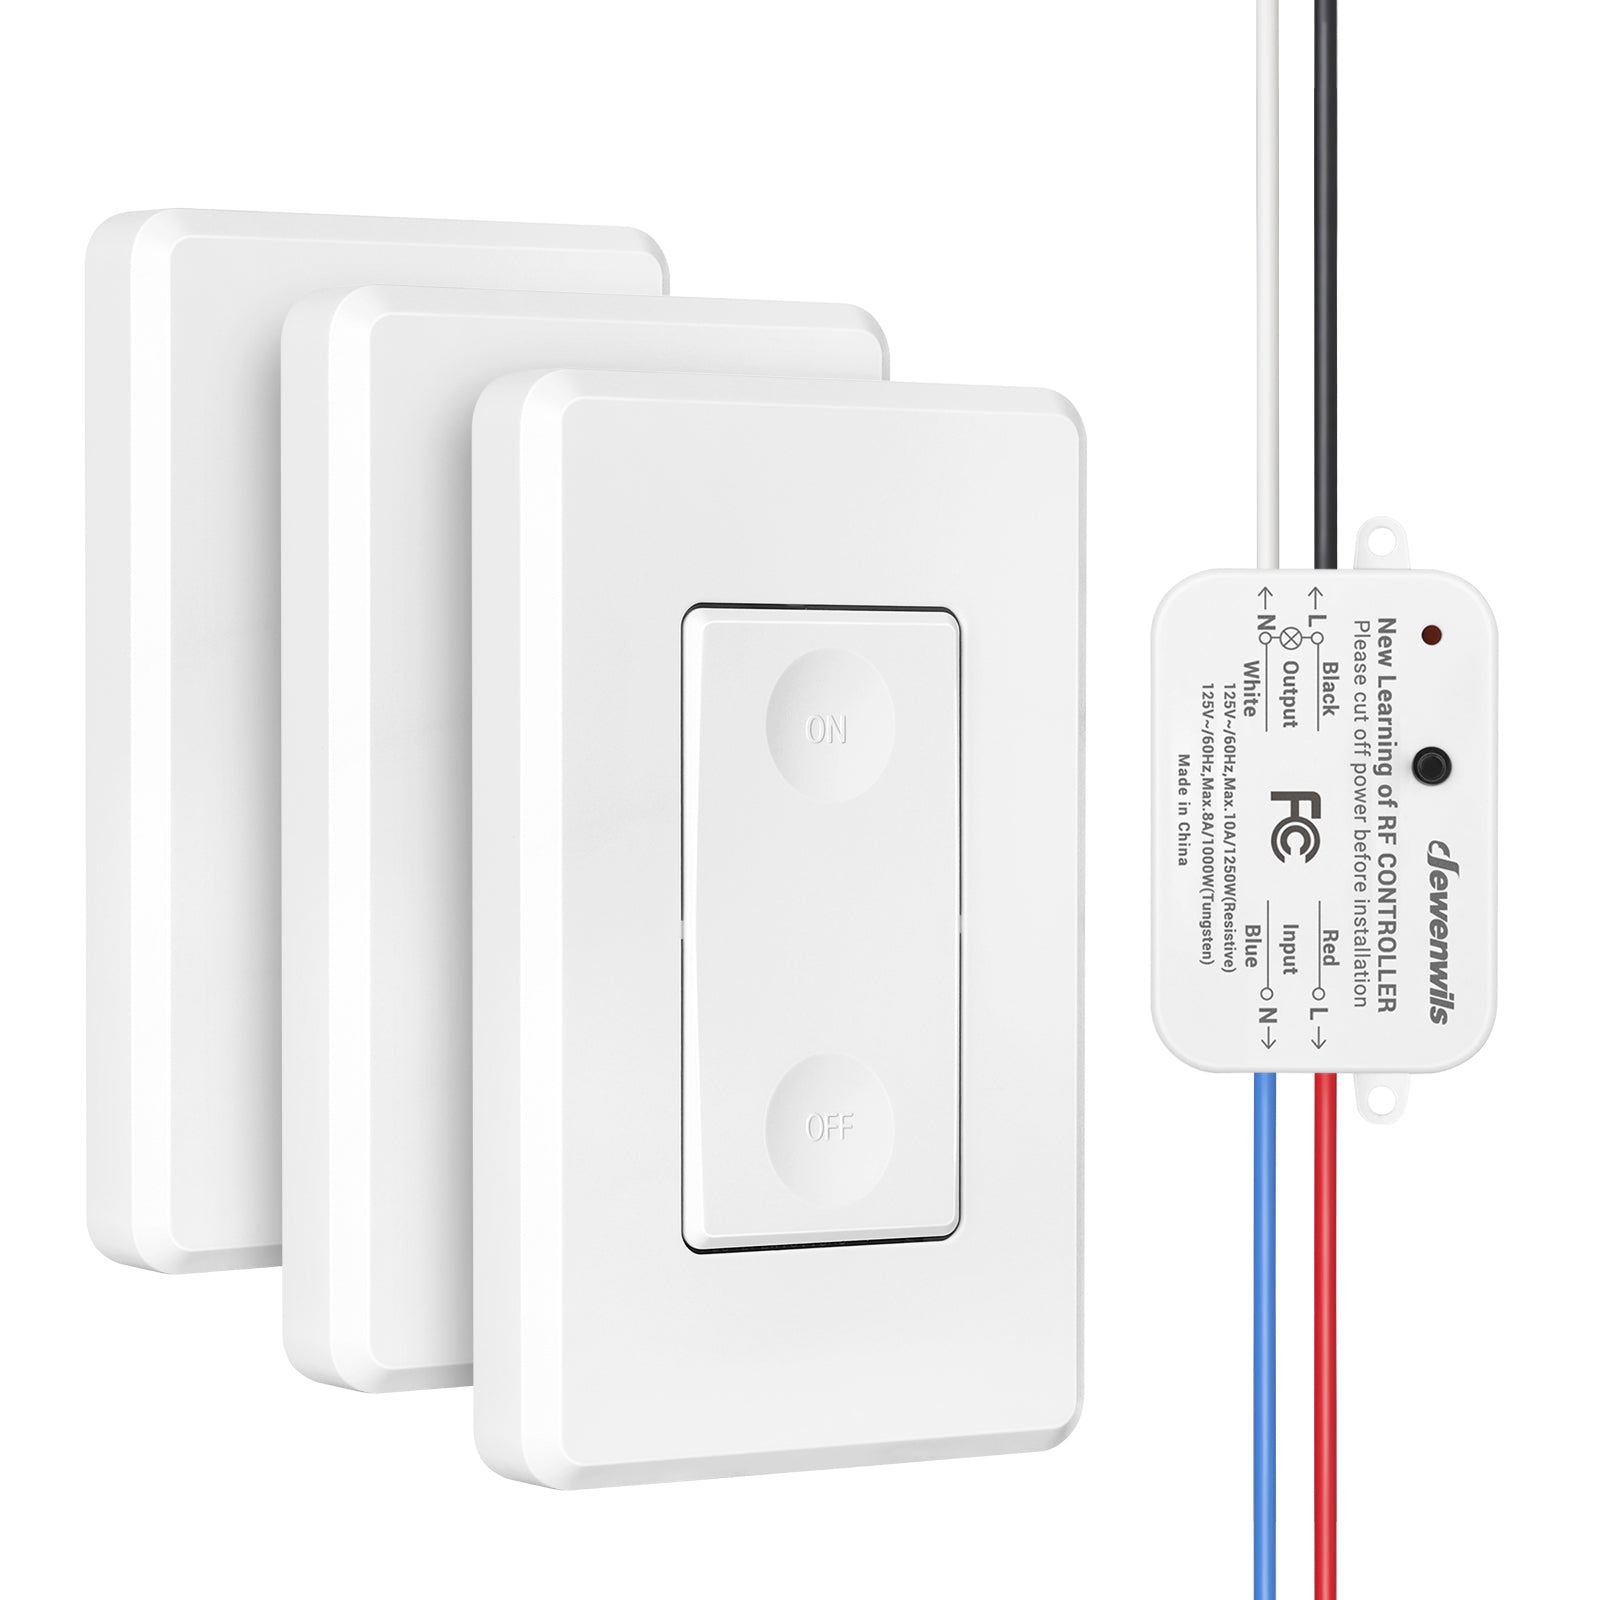 DEWENWILS Remote Control Outlet Switch, Wireless Light Switch for Household  Appliances(2 Switch+1 Outlet), No Wiring Needed